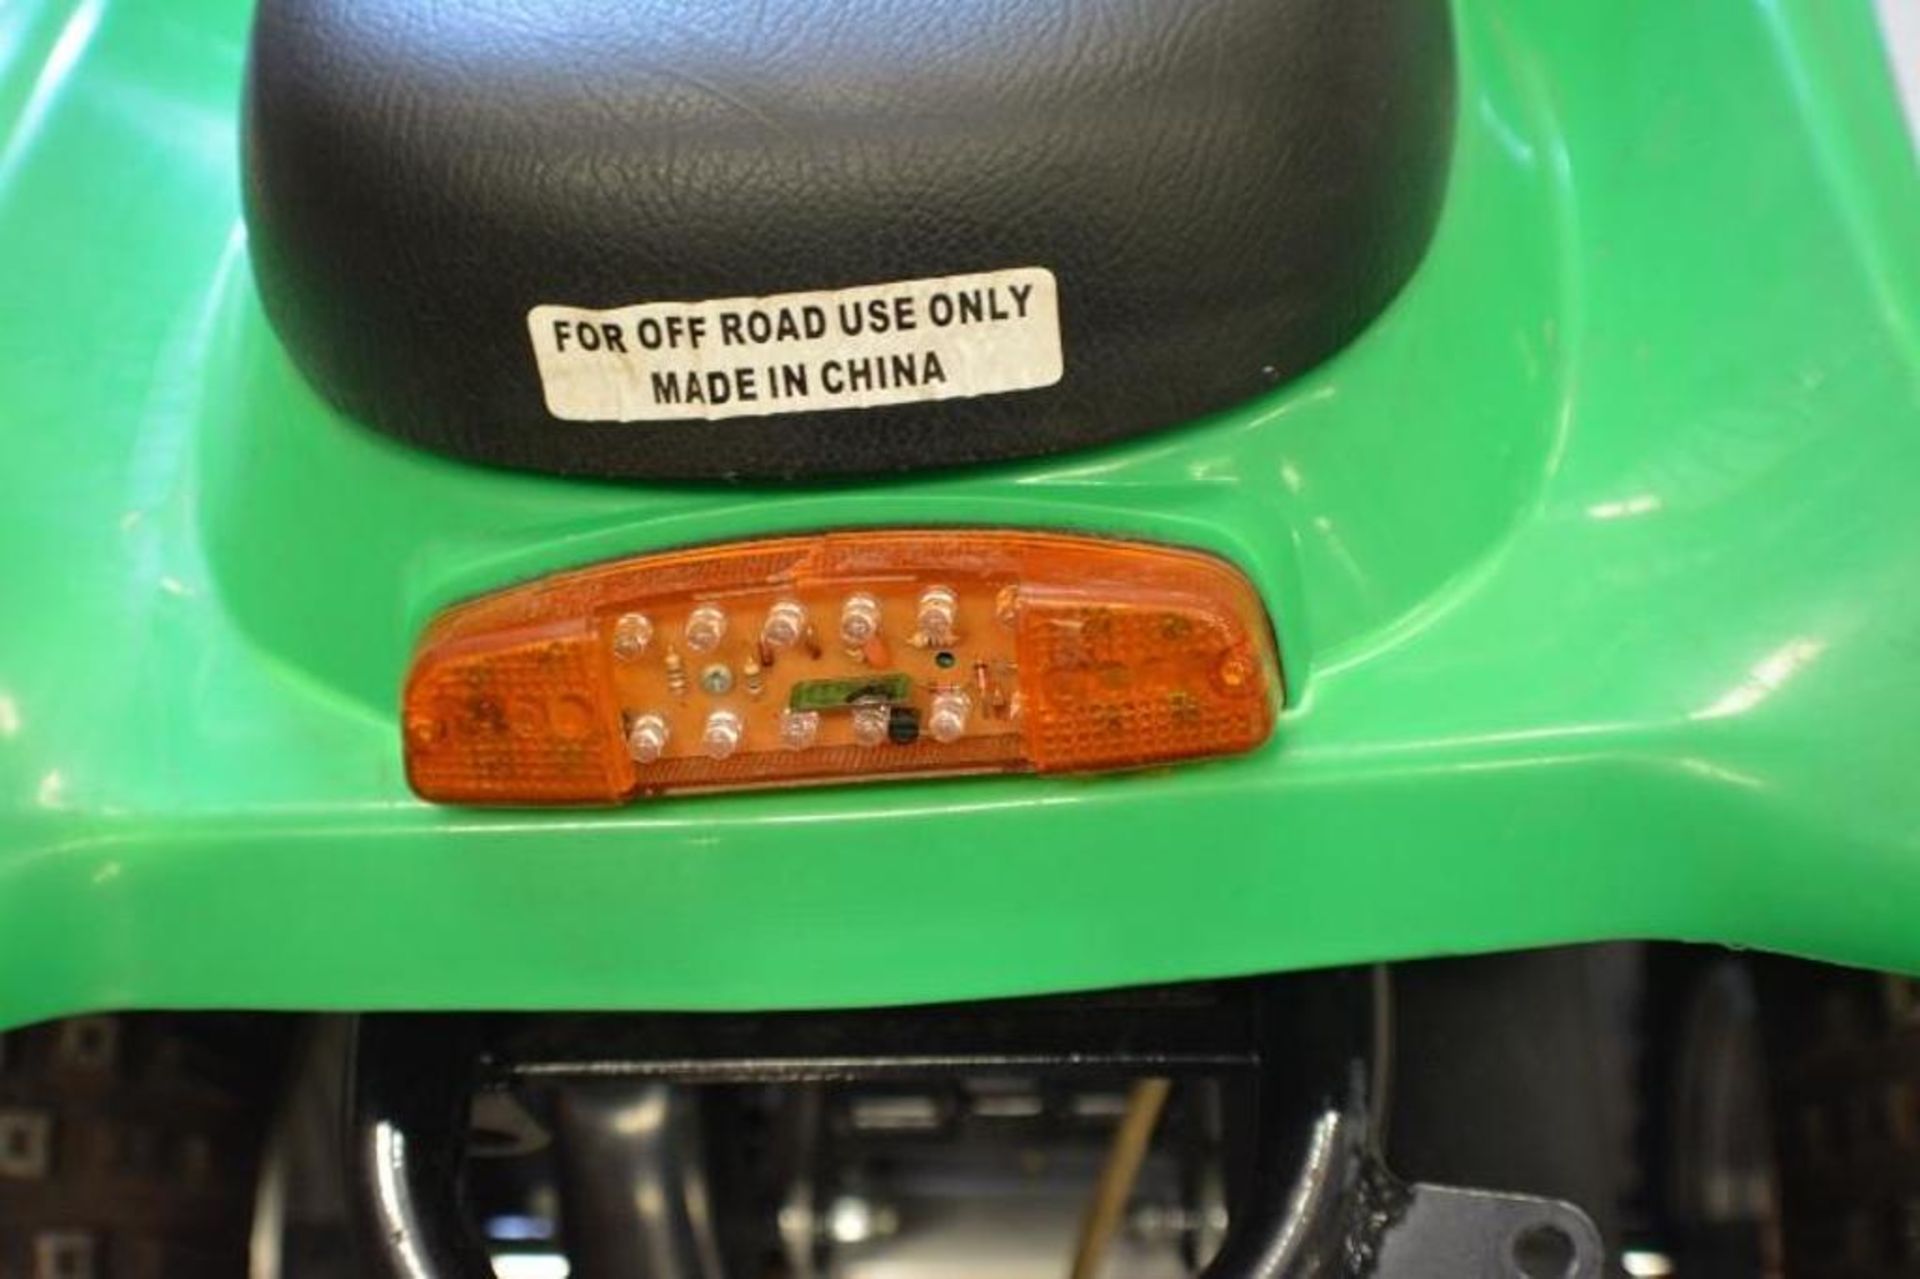 ATV 50cc 4 Stroke. Green Color. This unit are for EXPORT ONLY. Buyers acknowledges is for export onl - Image 9 of 9